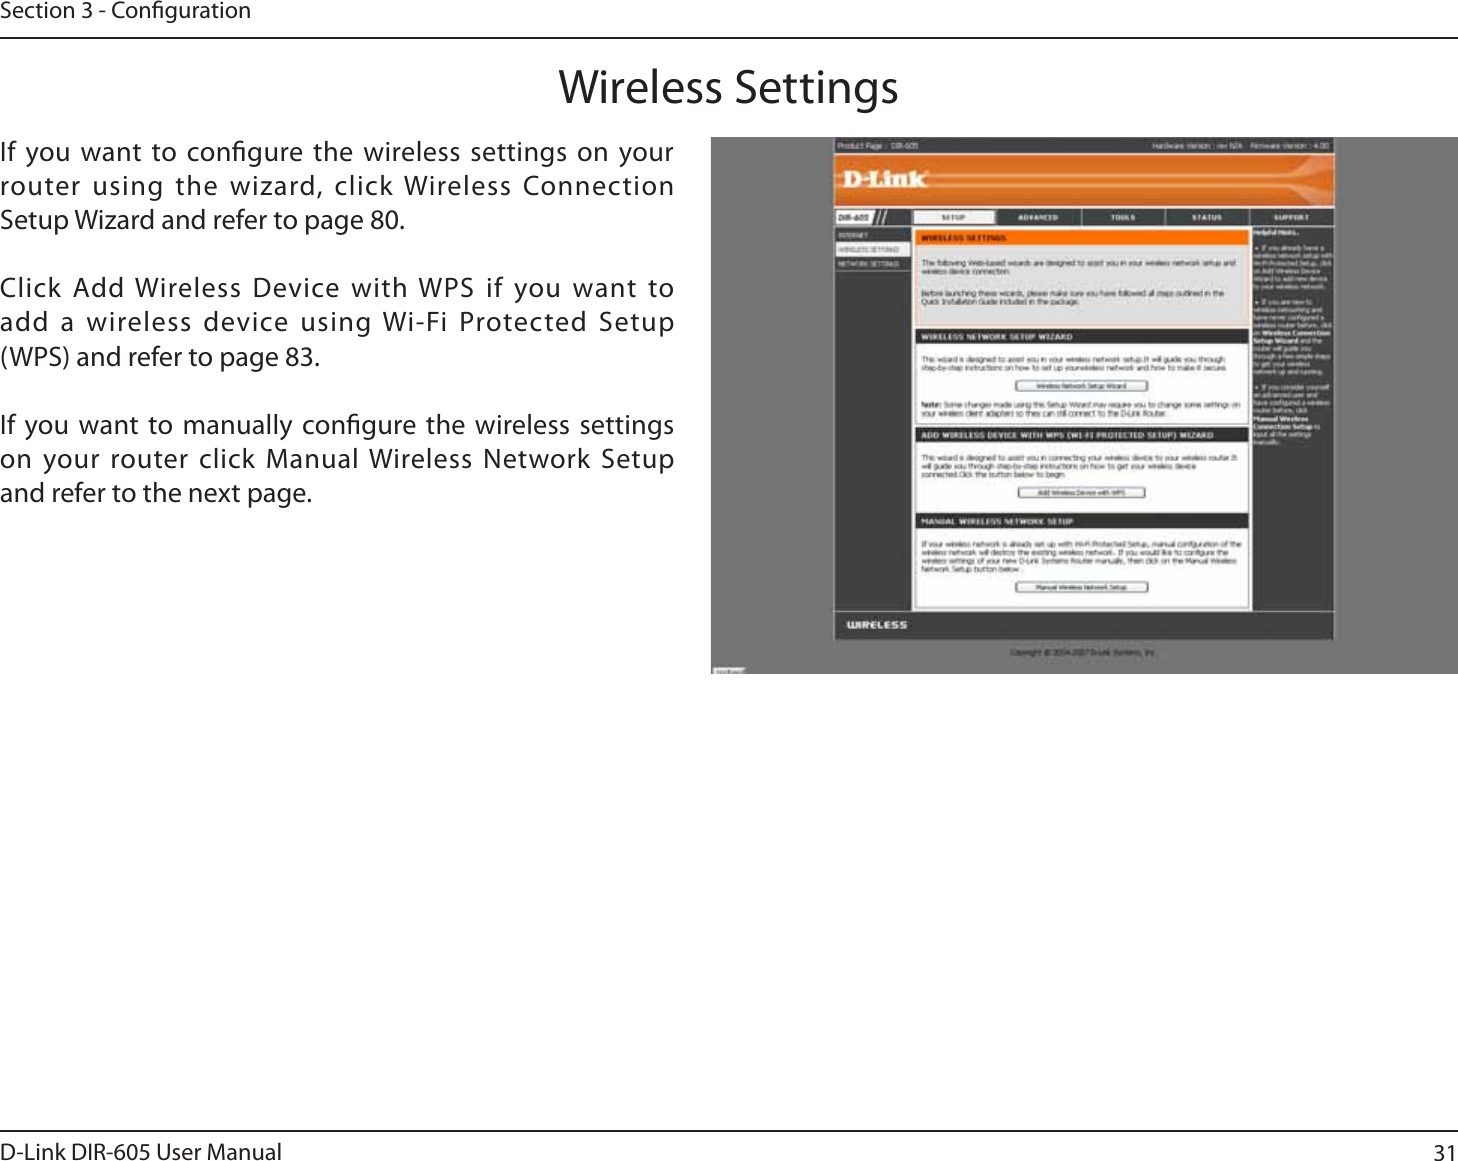 31D-Link DIR-605 User ManualSection 3 - CongurationWireless SettingsIf you want to congure the wireless settings on your router using the wizard, click Wireless Connection  Setup Wizard and refer to page 80.Click Add Wireless Device with WPS if you want to add a wireless device using Wi-Fi Protected Setup (WPS) and refer to page 83.If you want to manually congure the wireless settings on your router click Manual Wireless Network Setup and refer to the next page.